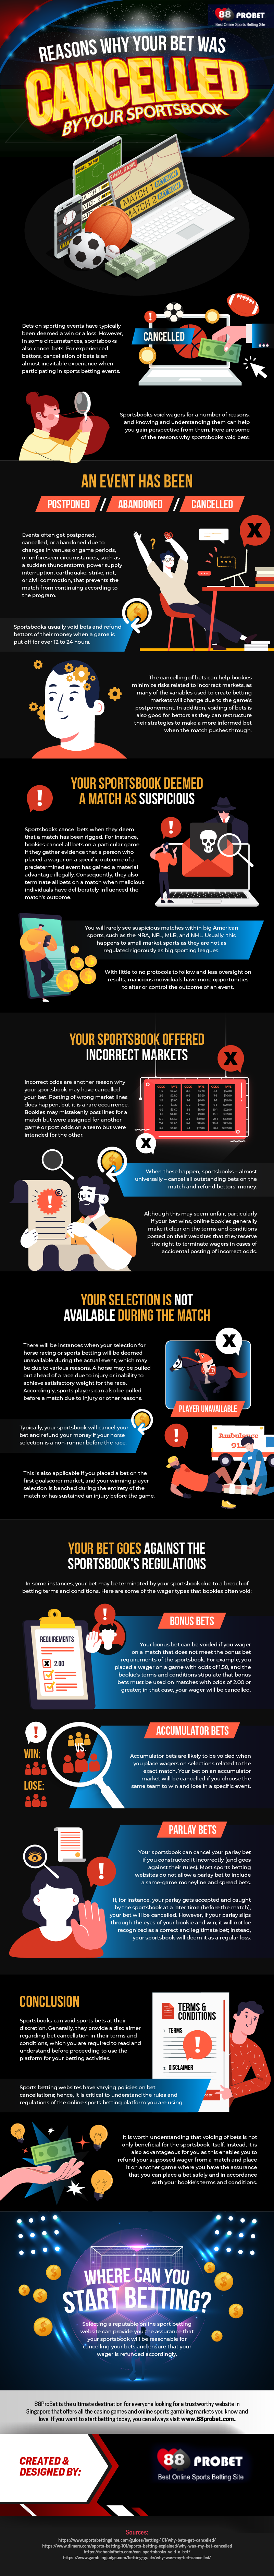 Reasons-Why-Your-Bet-was-Cancelled-by-Your-Sportsbook-Infographic